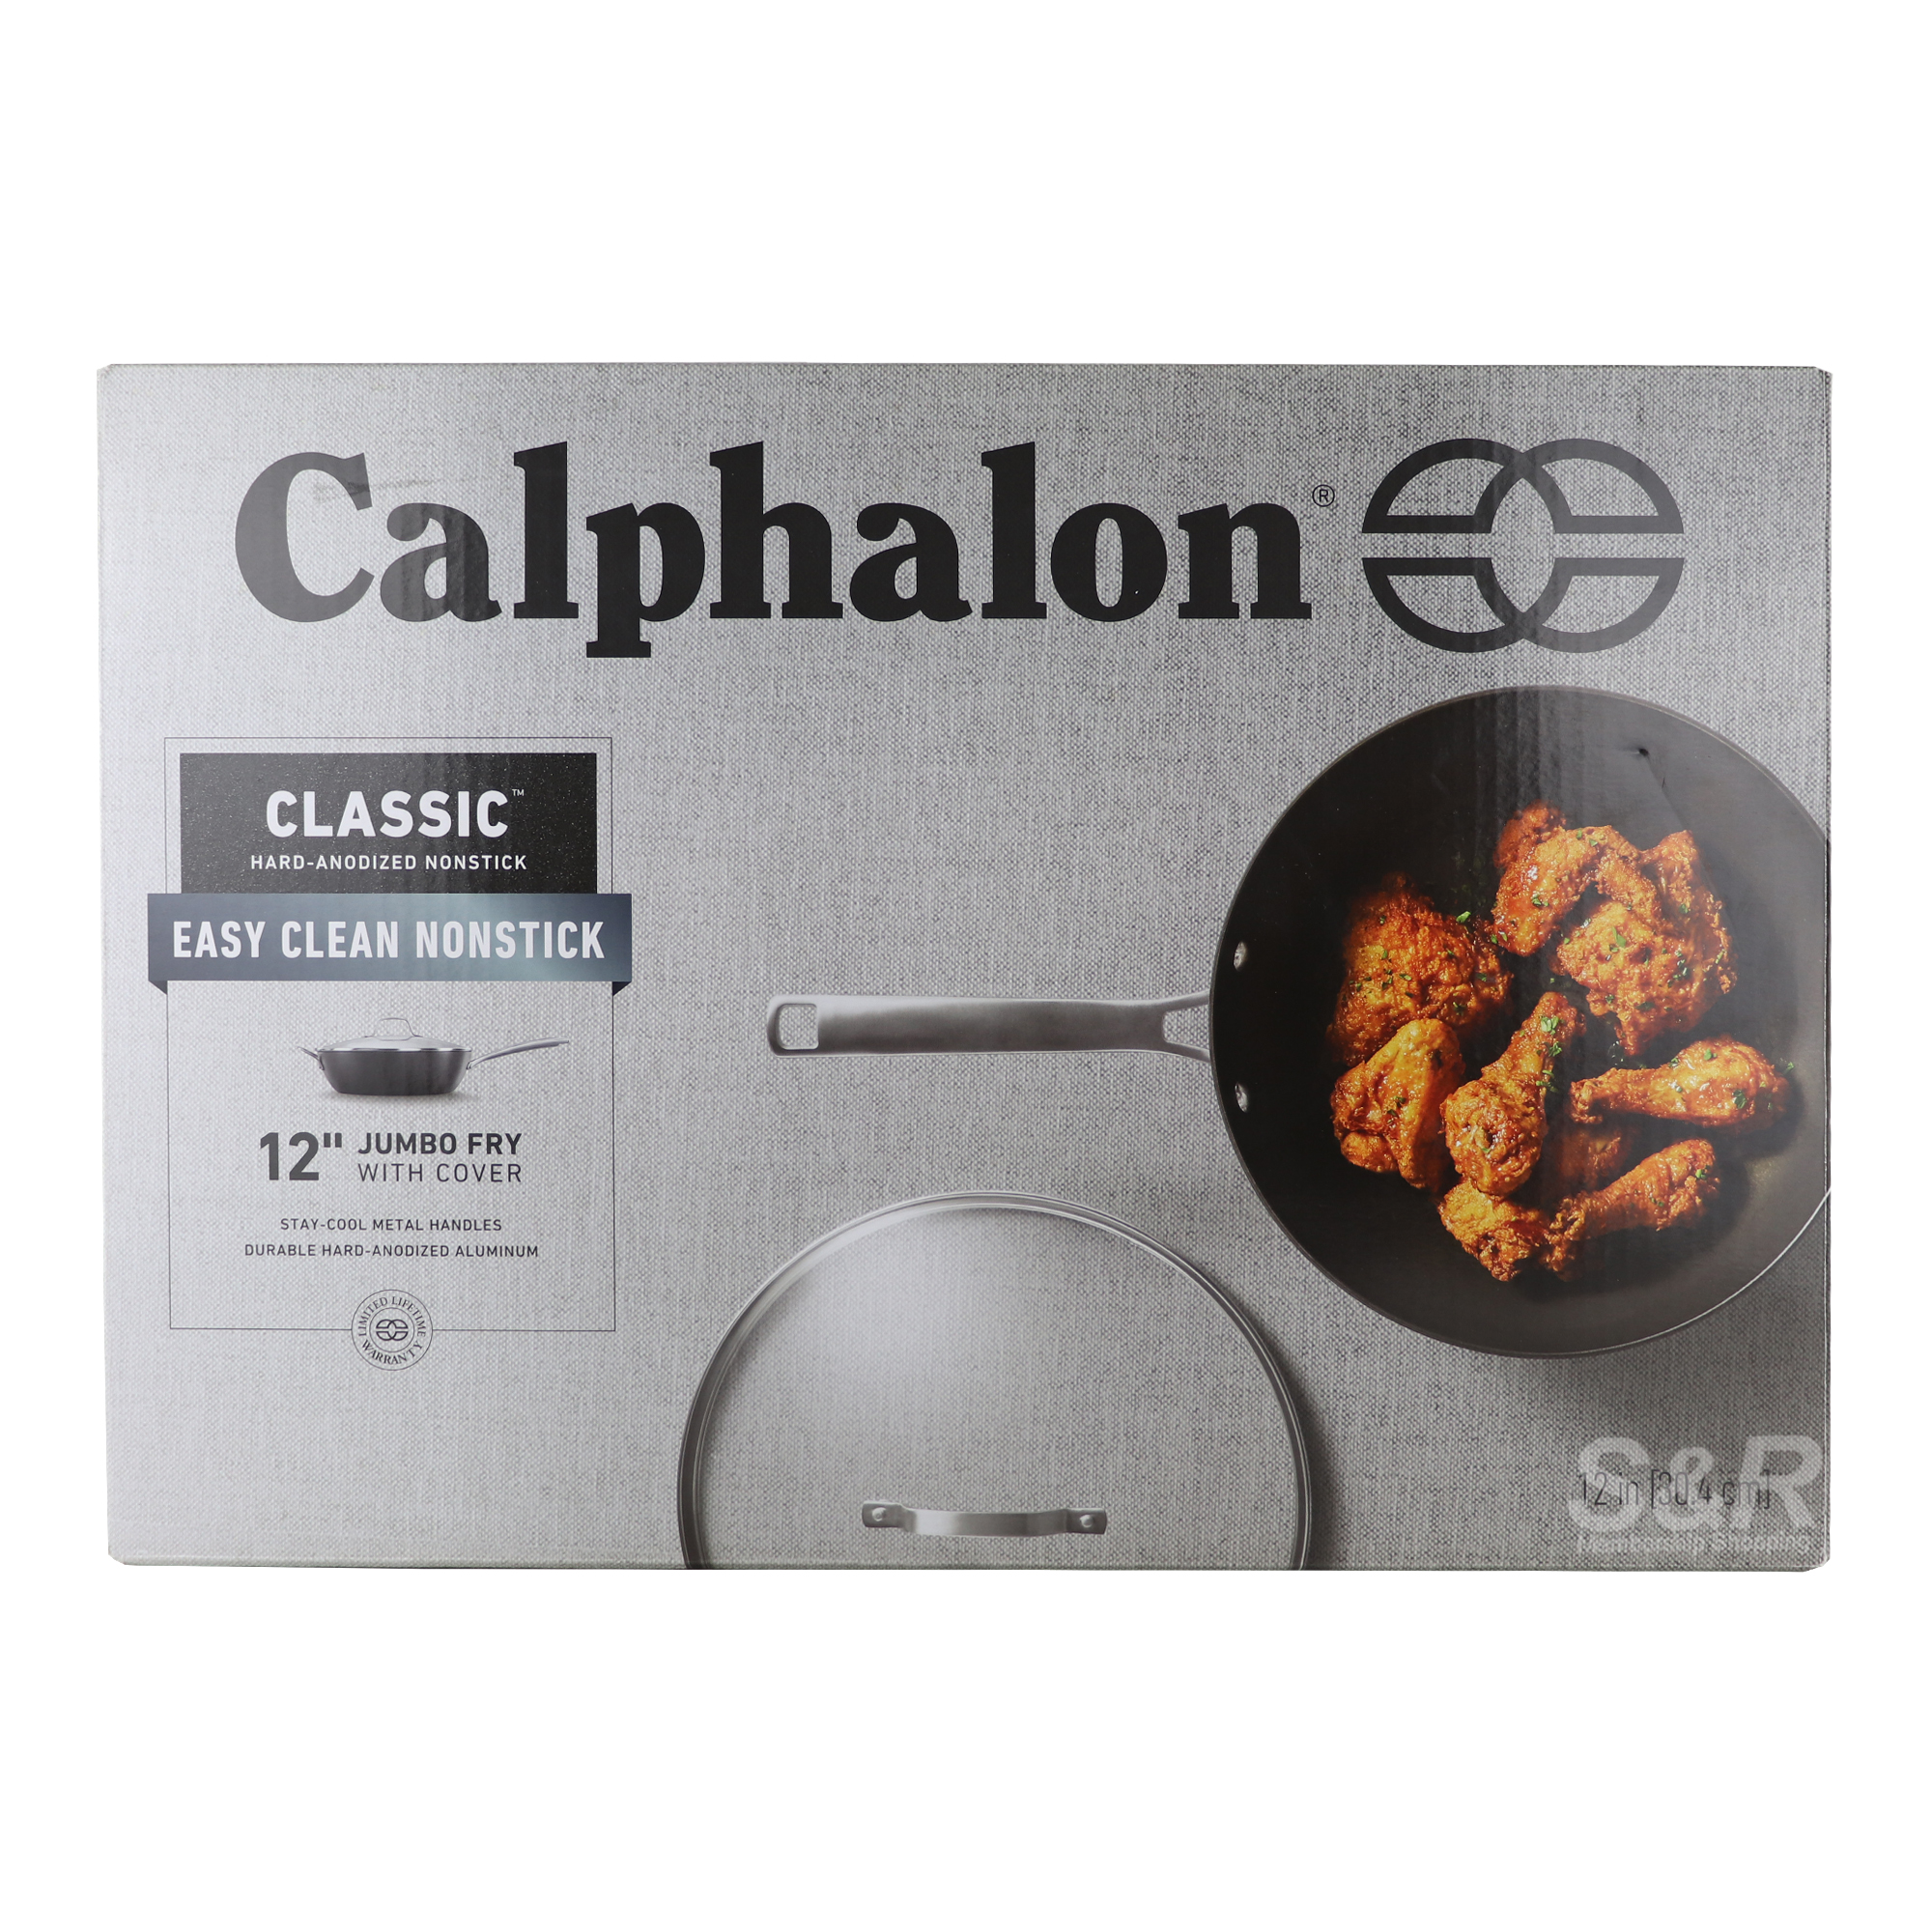 Calphalon Classic 12" Jumbo Fry with Cover 1pc